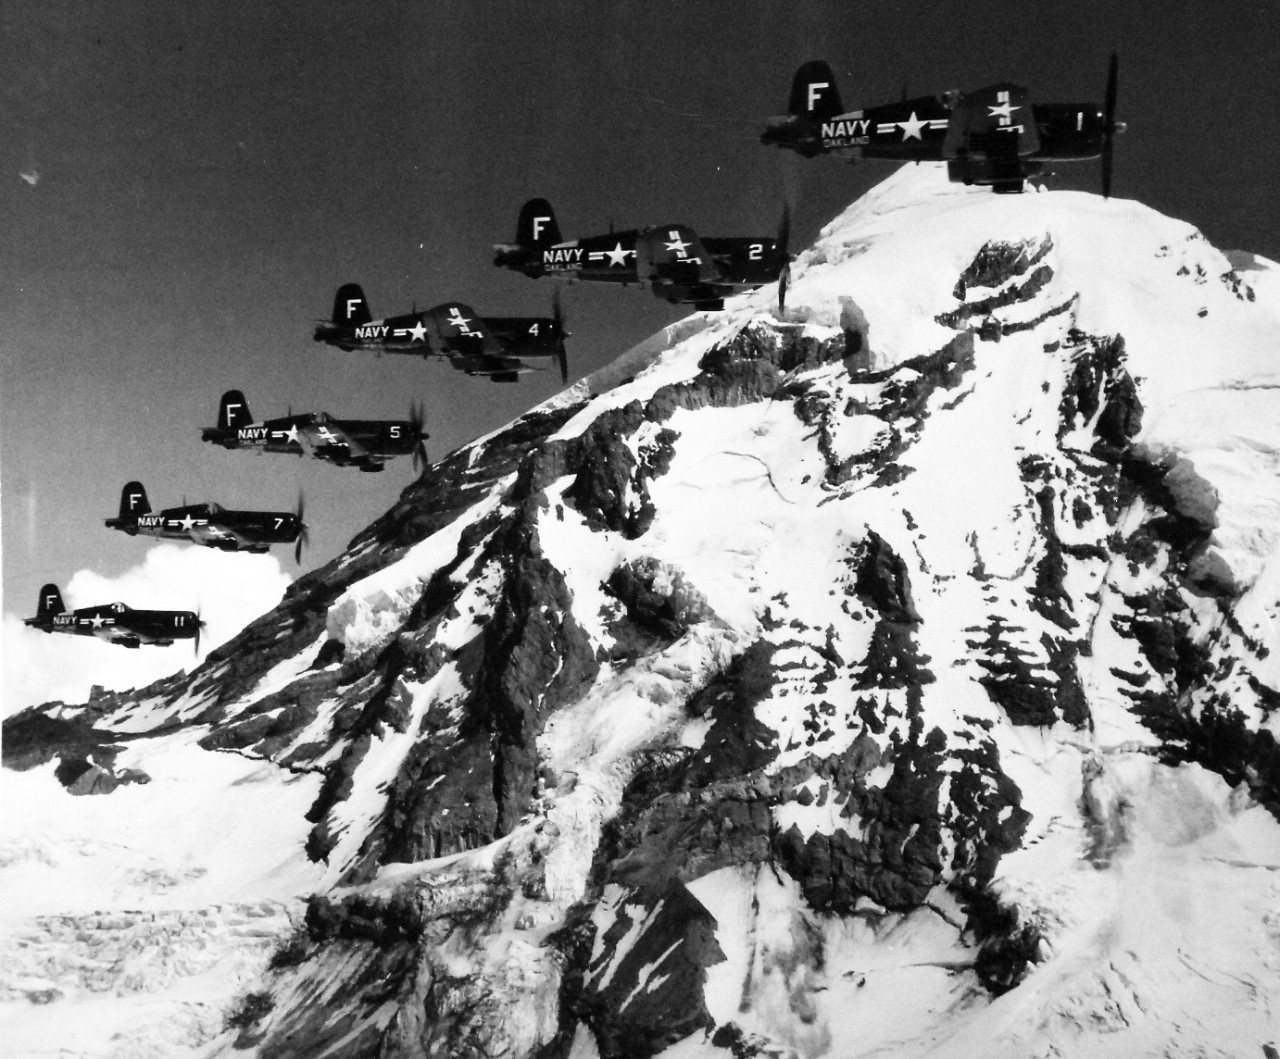 80-G-626682:  Vought F4U-4 Corsairs, July 1953.  Corsairs of (VF 875) flying in formation near Mt. Rainer, Washington.  Photographed July 28, 1953.  U.S. Navy photograph, now in the collections of the National Archives.  